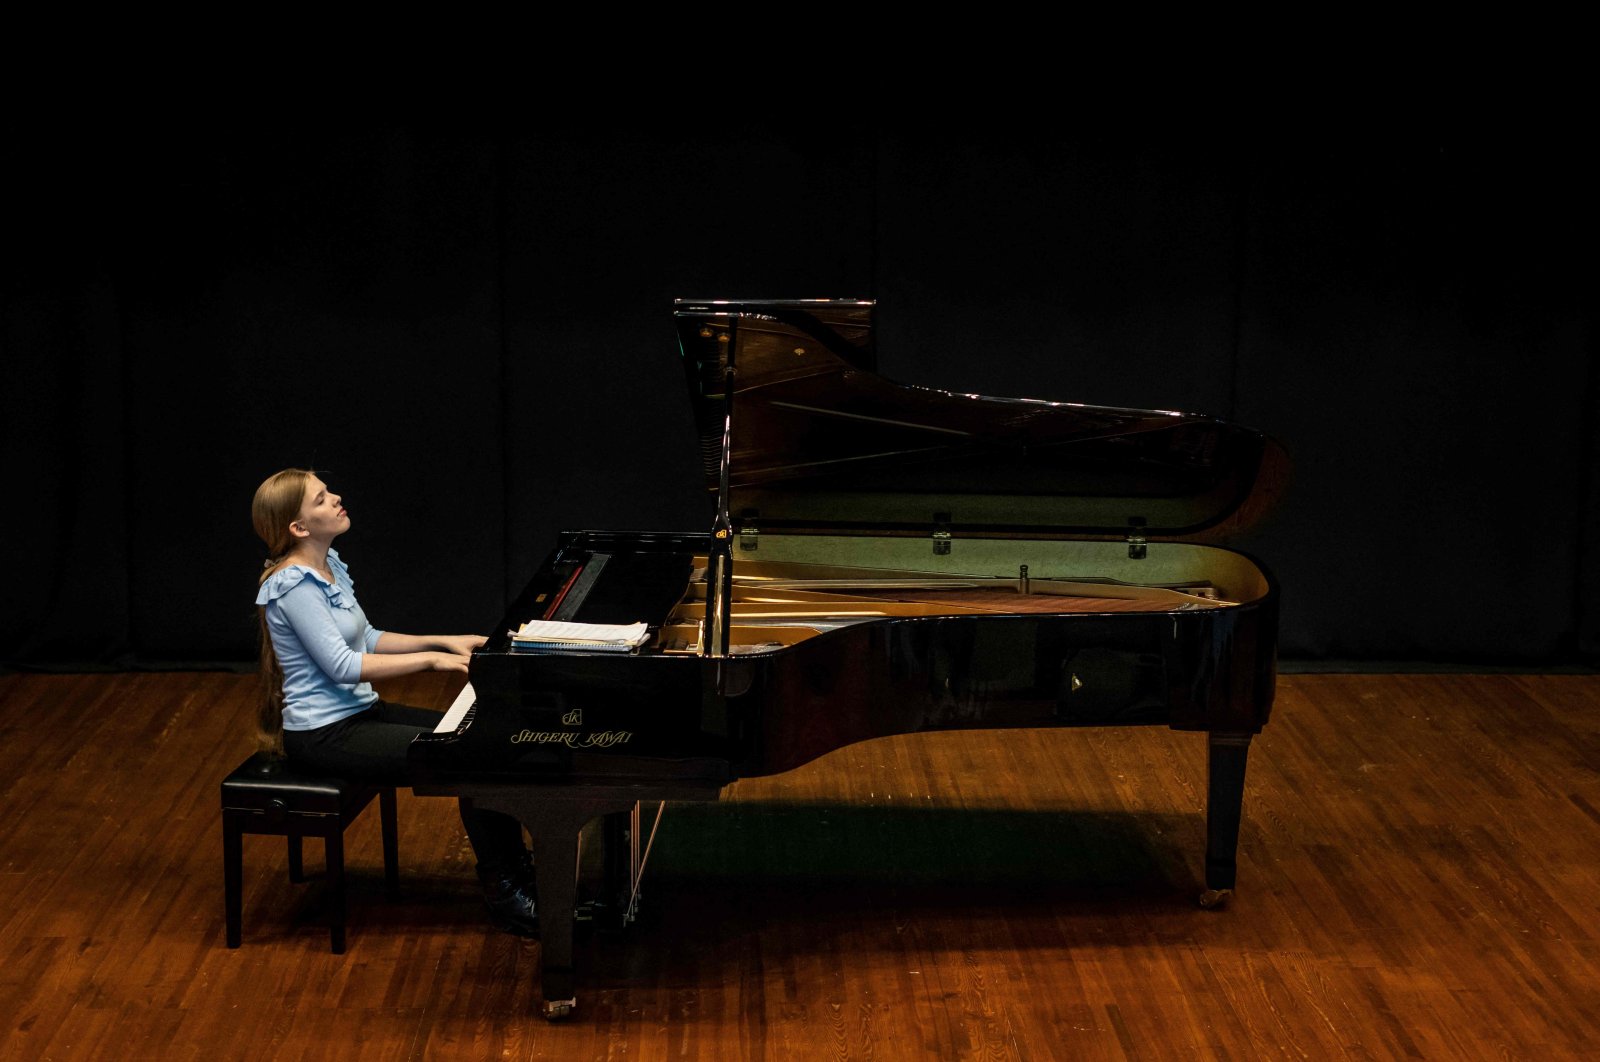 Eva Gevorgyan, 17, from Russia, one of the finalists of the 18th International Chopin Piano Competition, performs during a rehearsal at the Russian Culture Center in Warsaw, Poland, Oct. 11, 2021. (AFP Photo)